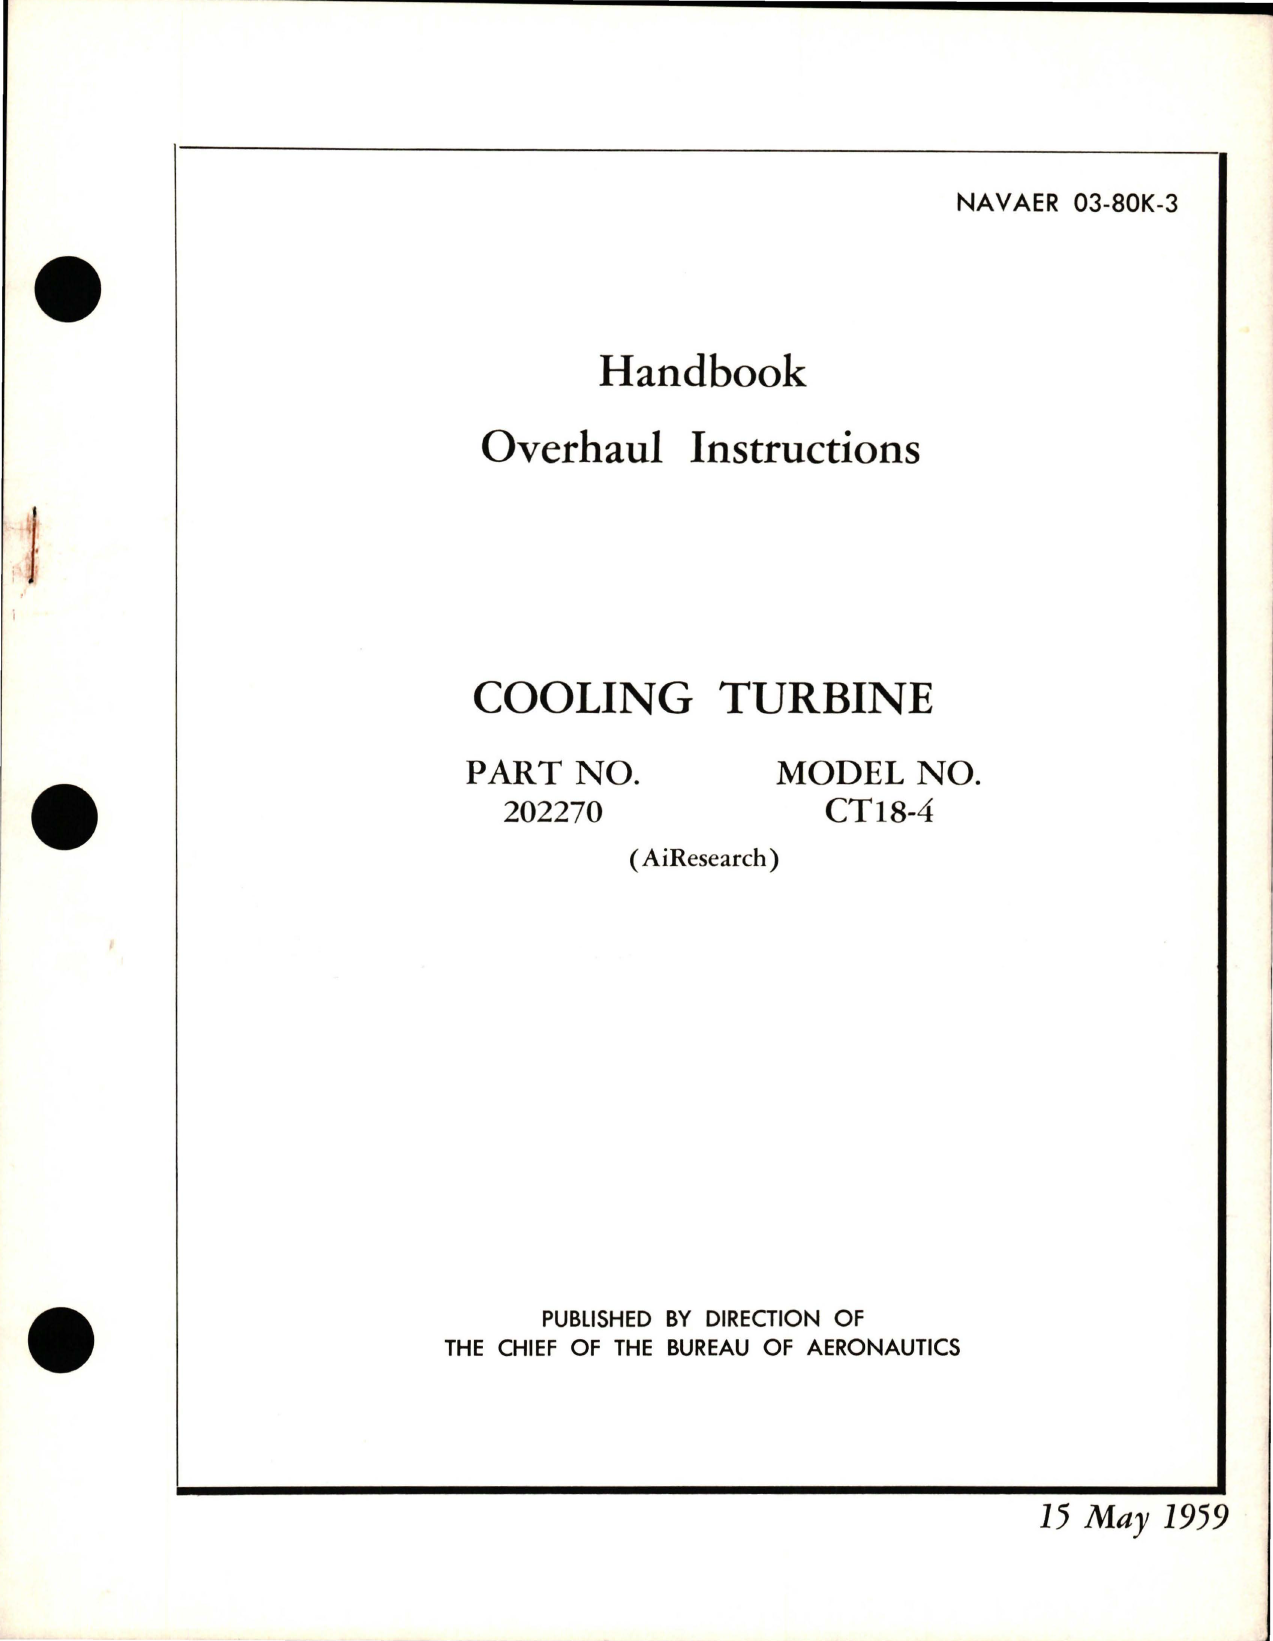 Sample page 1 from AirCorps Library document: Overhaul Instructions for Cooling Turbine - Part 202270 - Model CT18-4